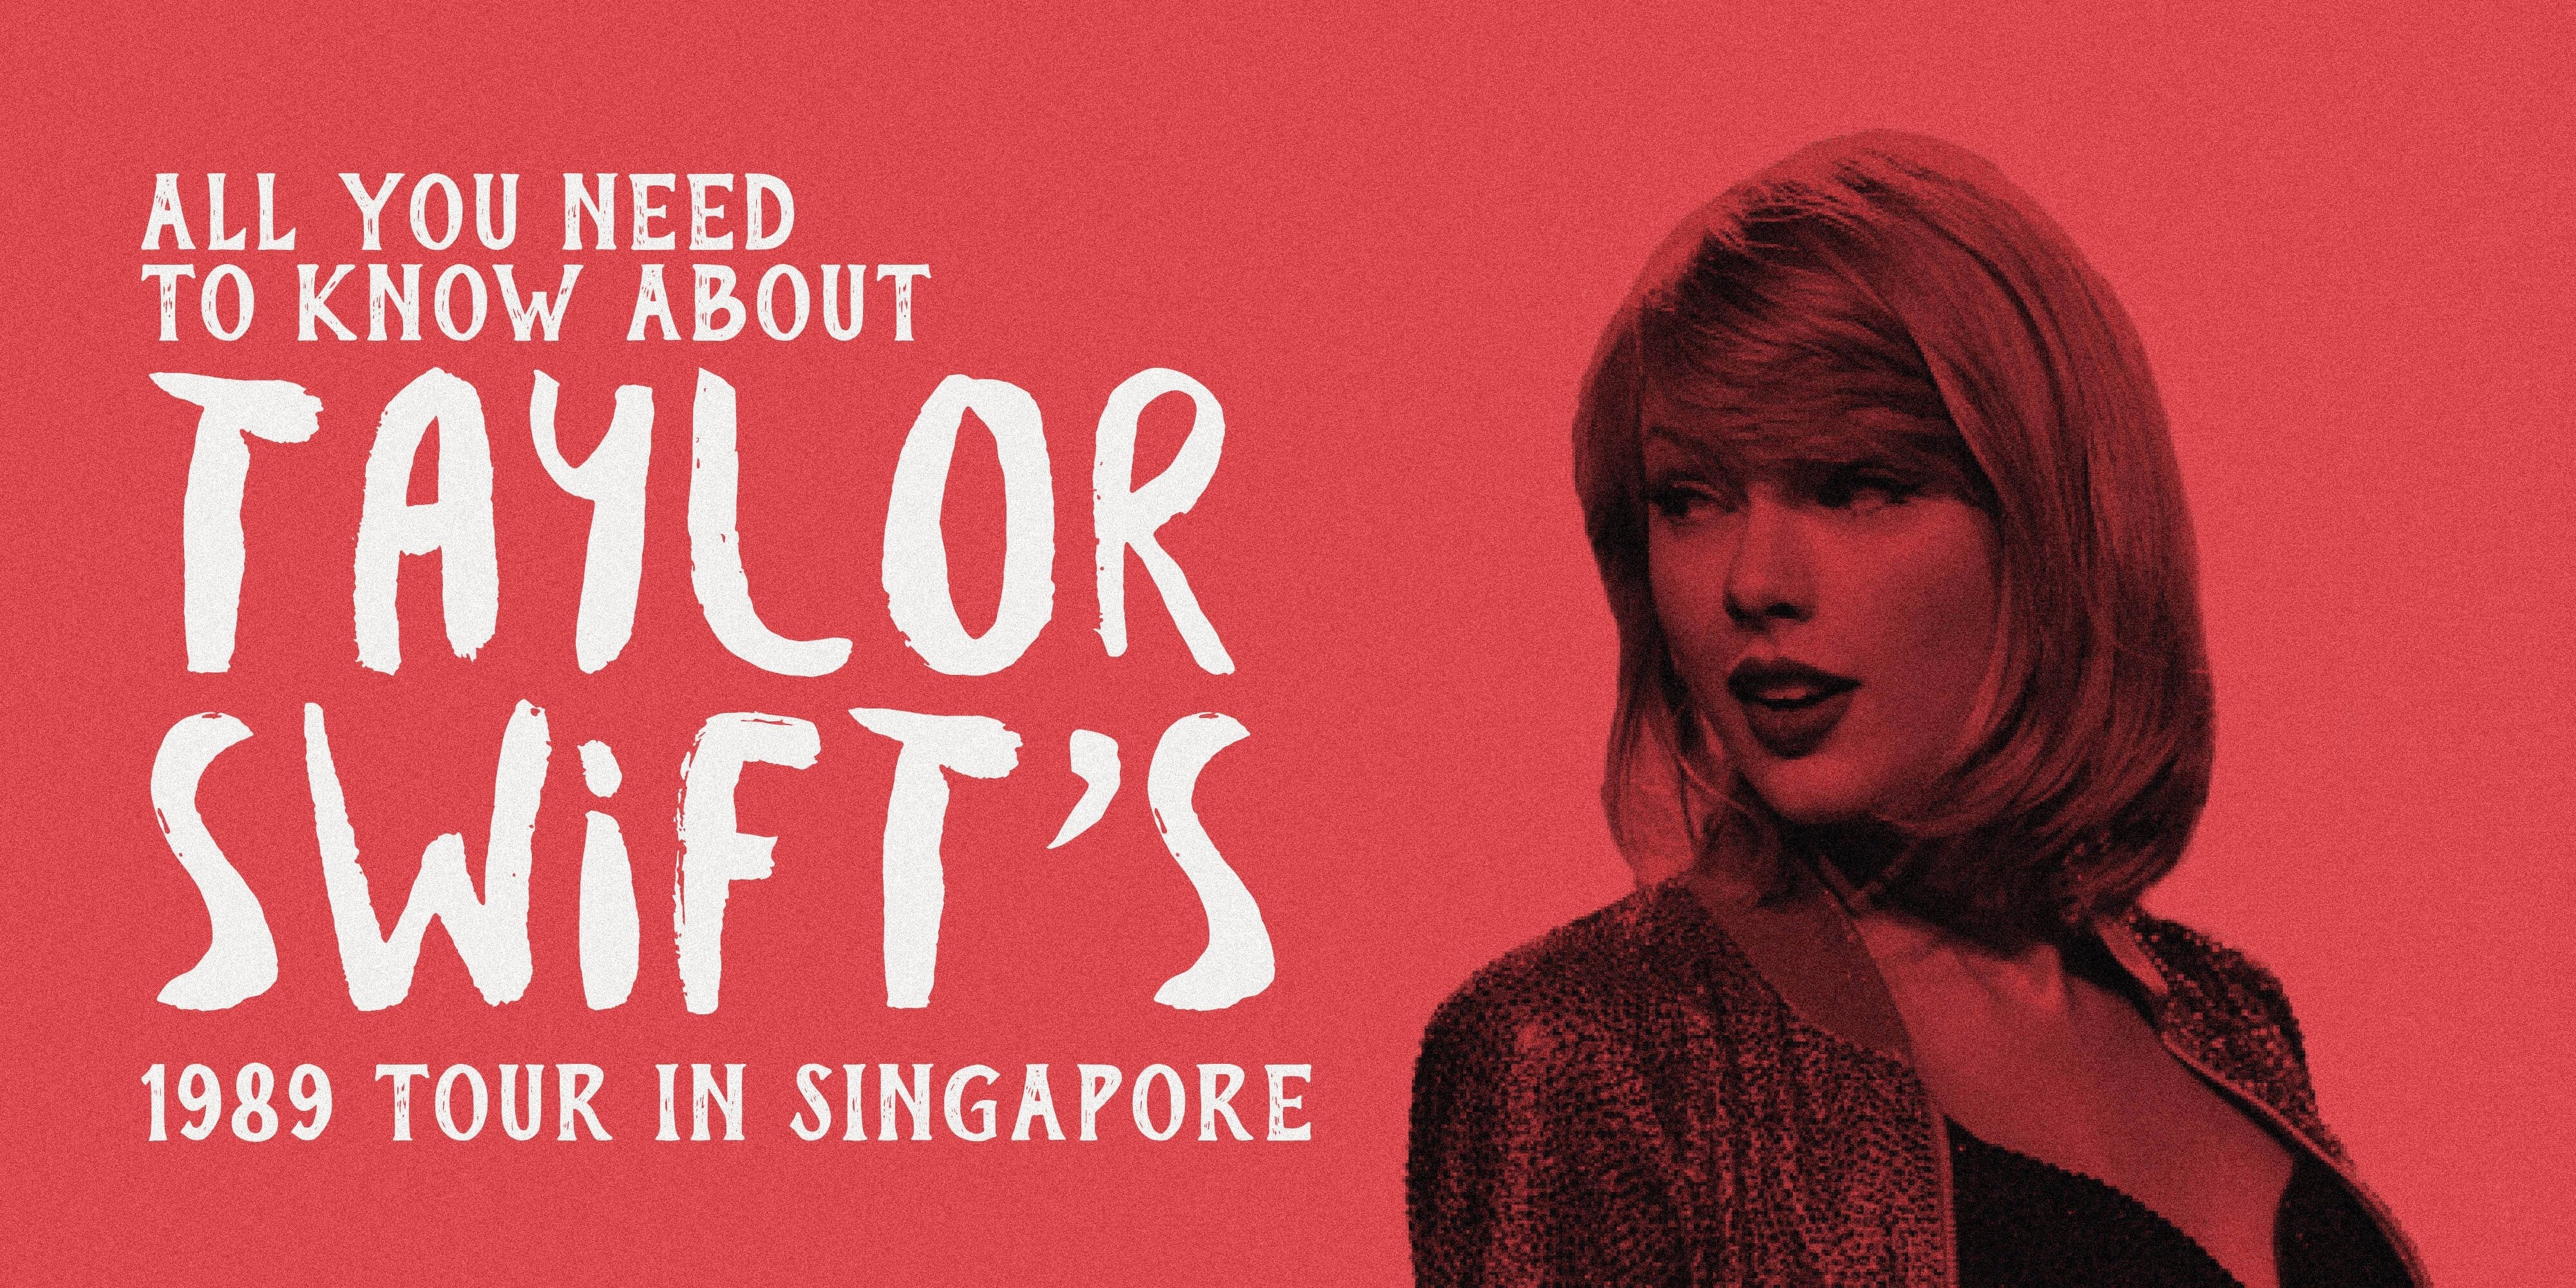 All You Need To Know About Taylor Swift's 1989 Tour in Singapore